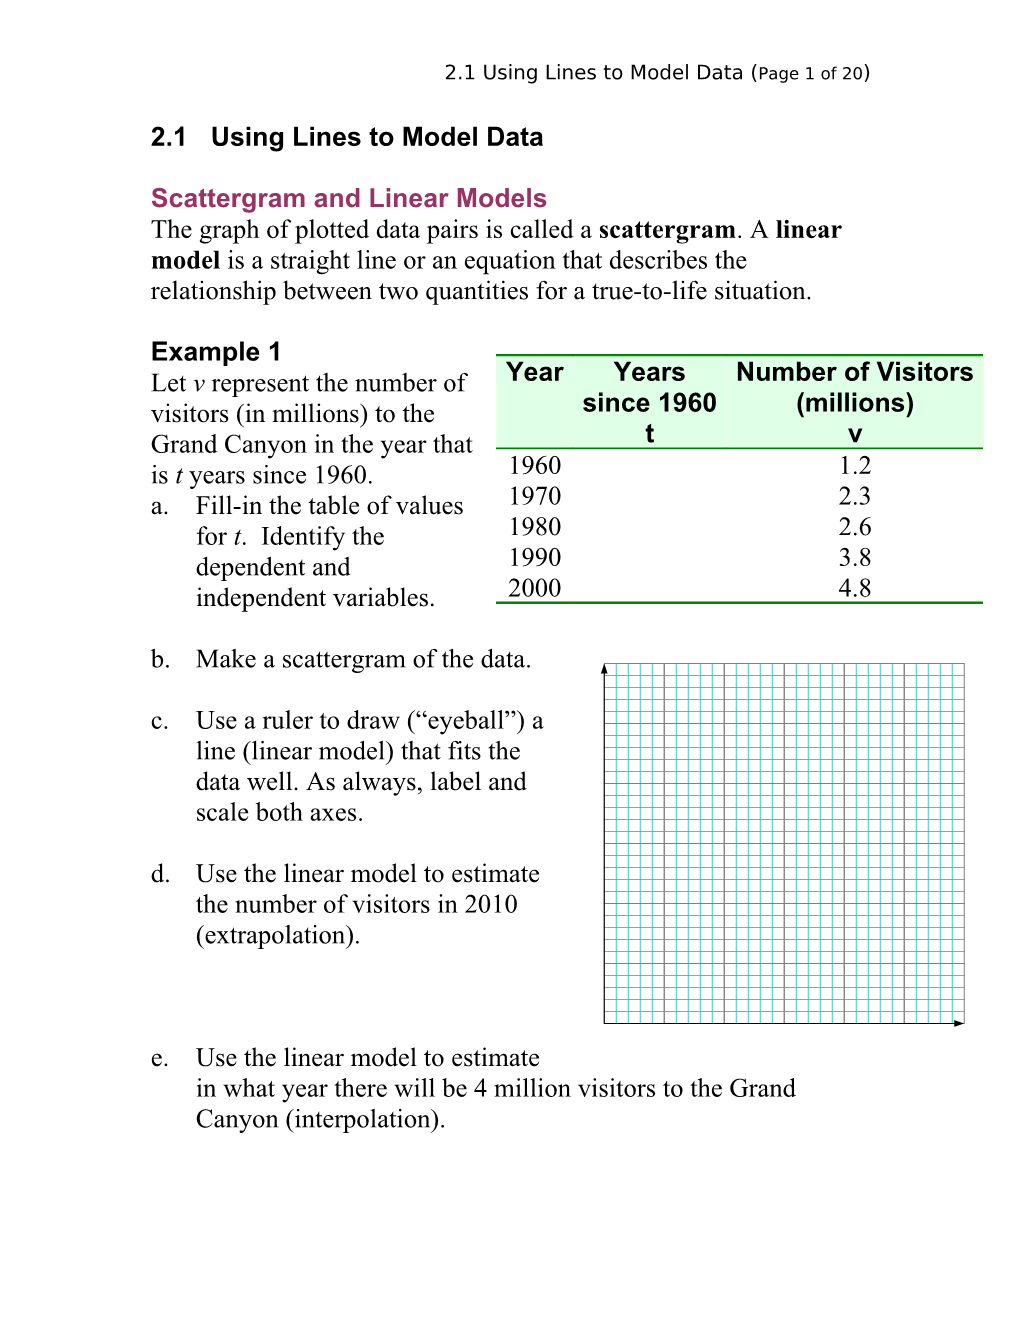 Chapter 1: Modeling With Linear Functions